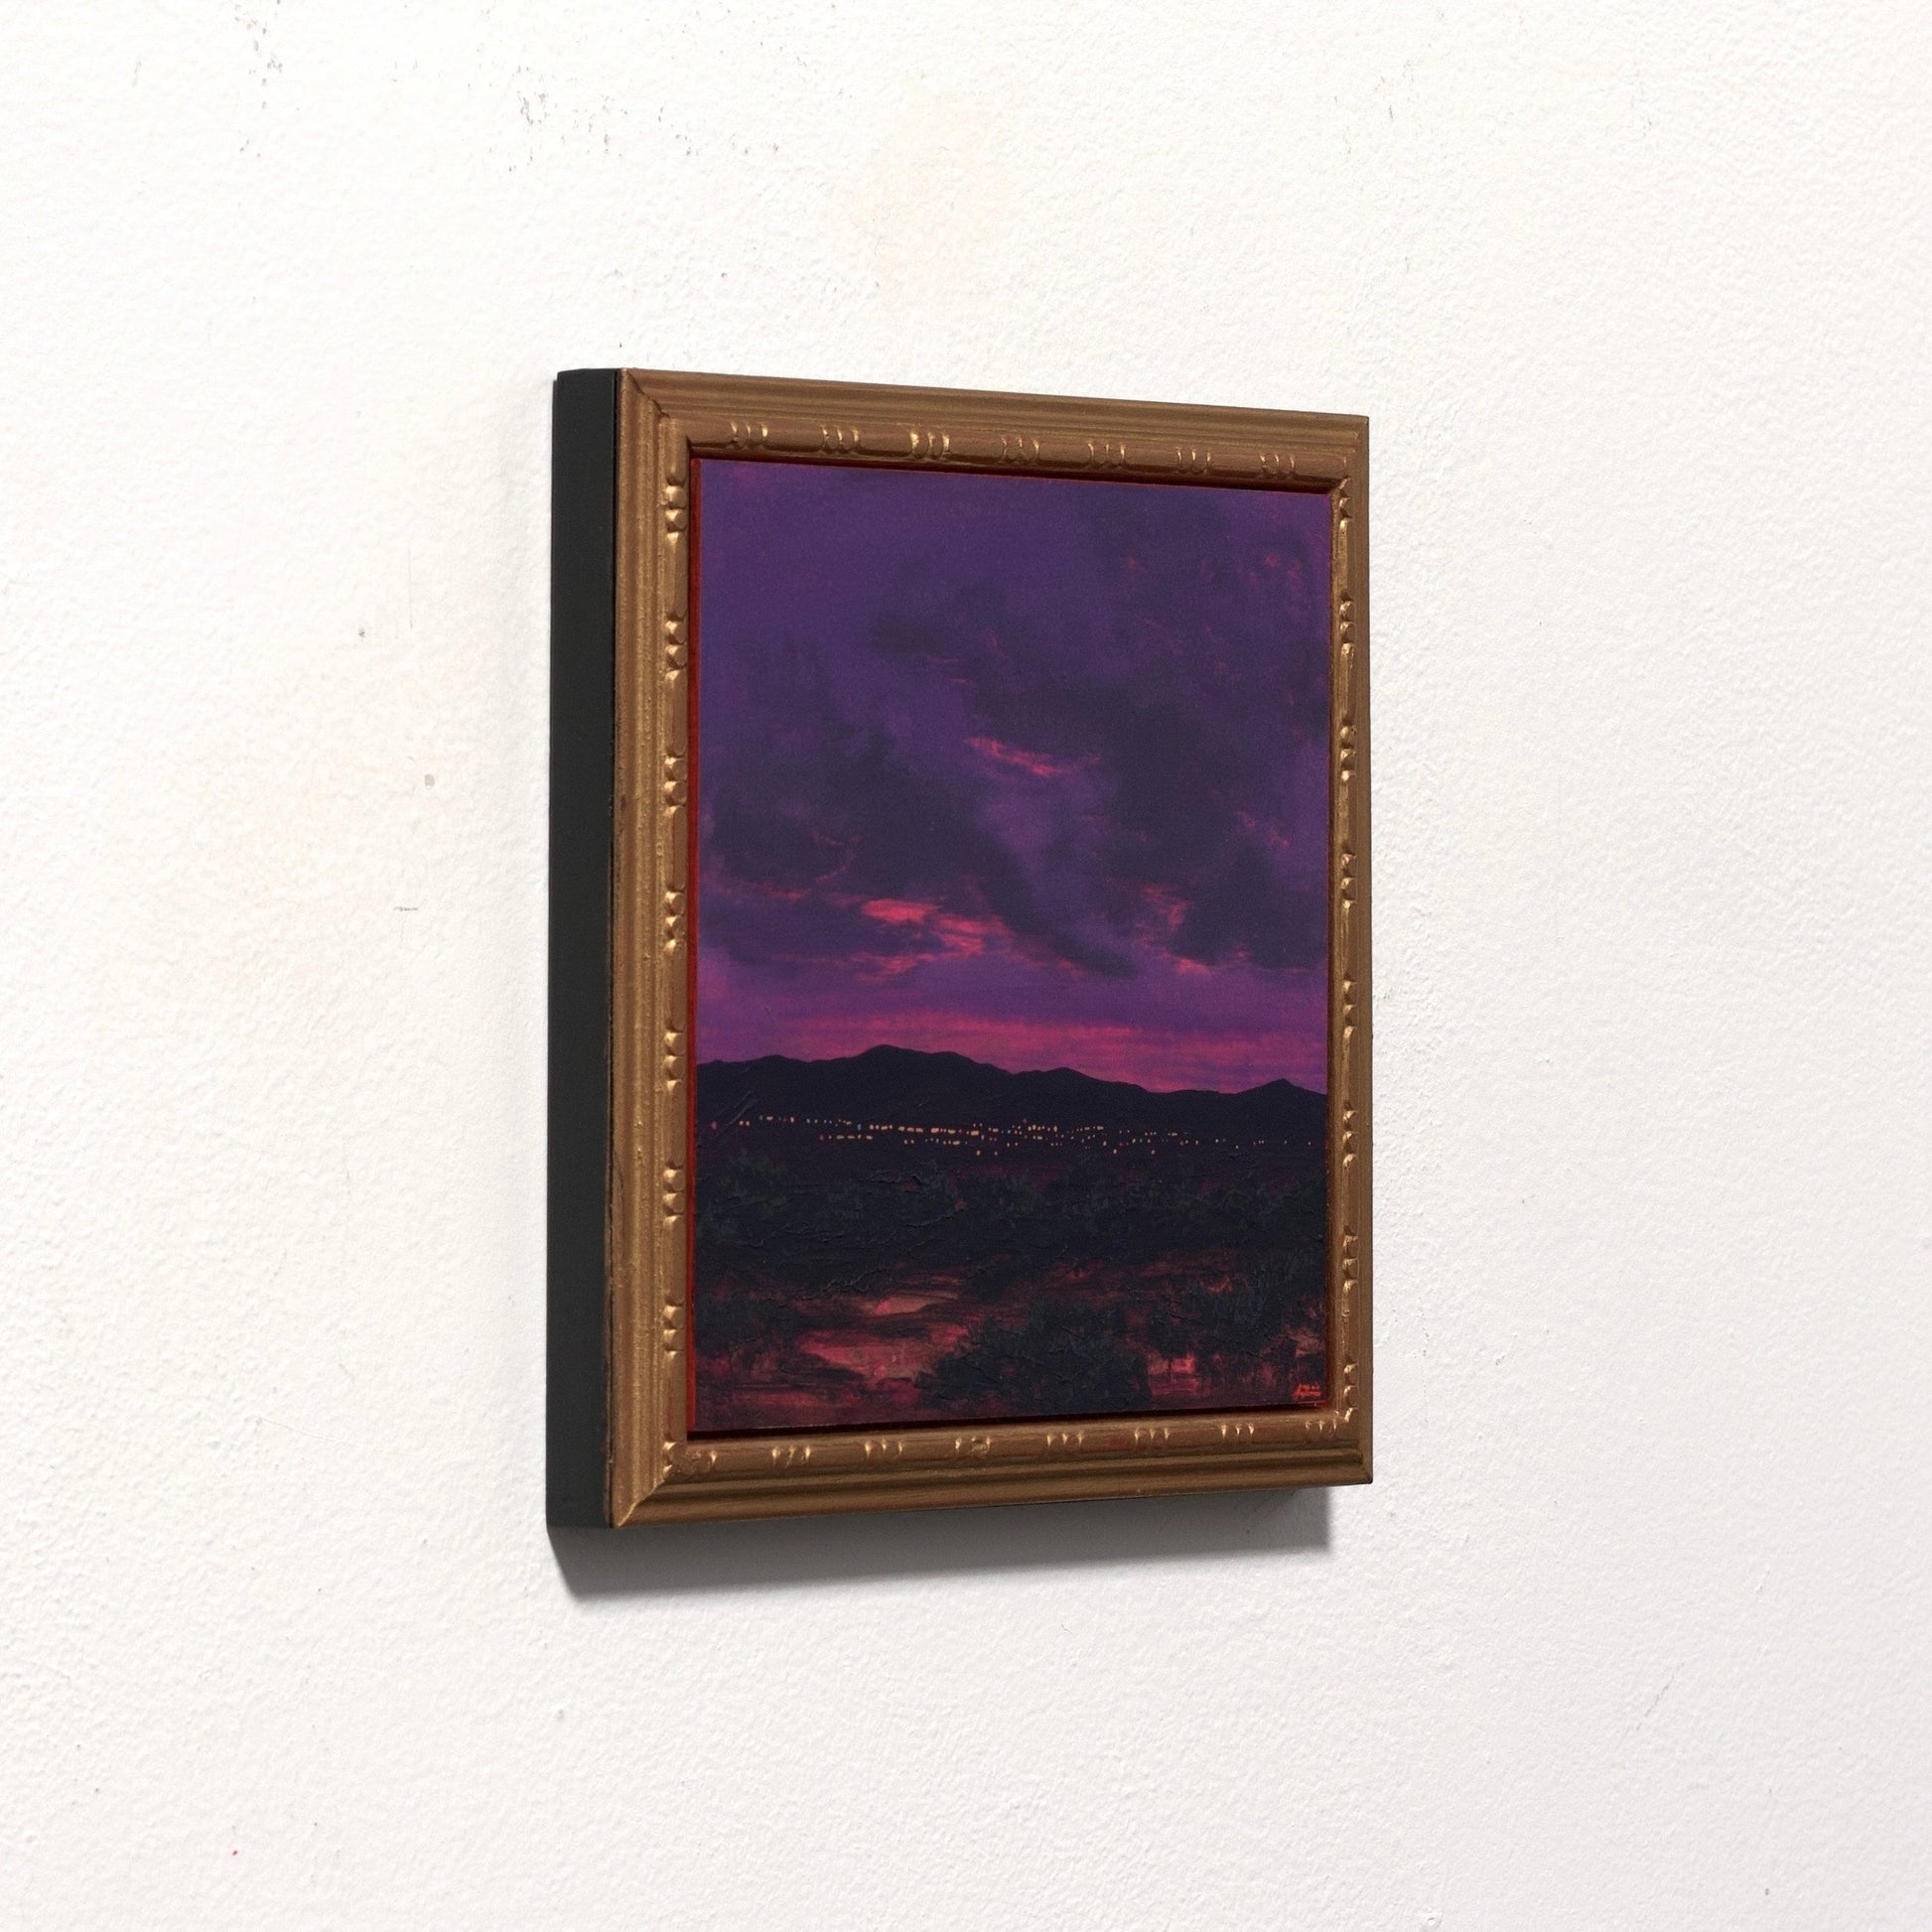 Santa Fe Nocturne Series 04, No.01 - Original Southwest Landscape Oil Painting - 8 x 8 inches in handmade frame